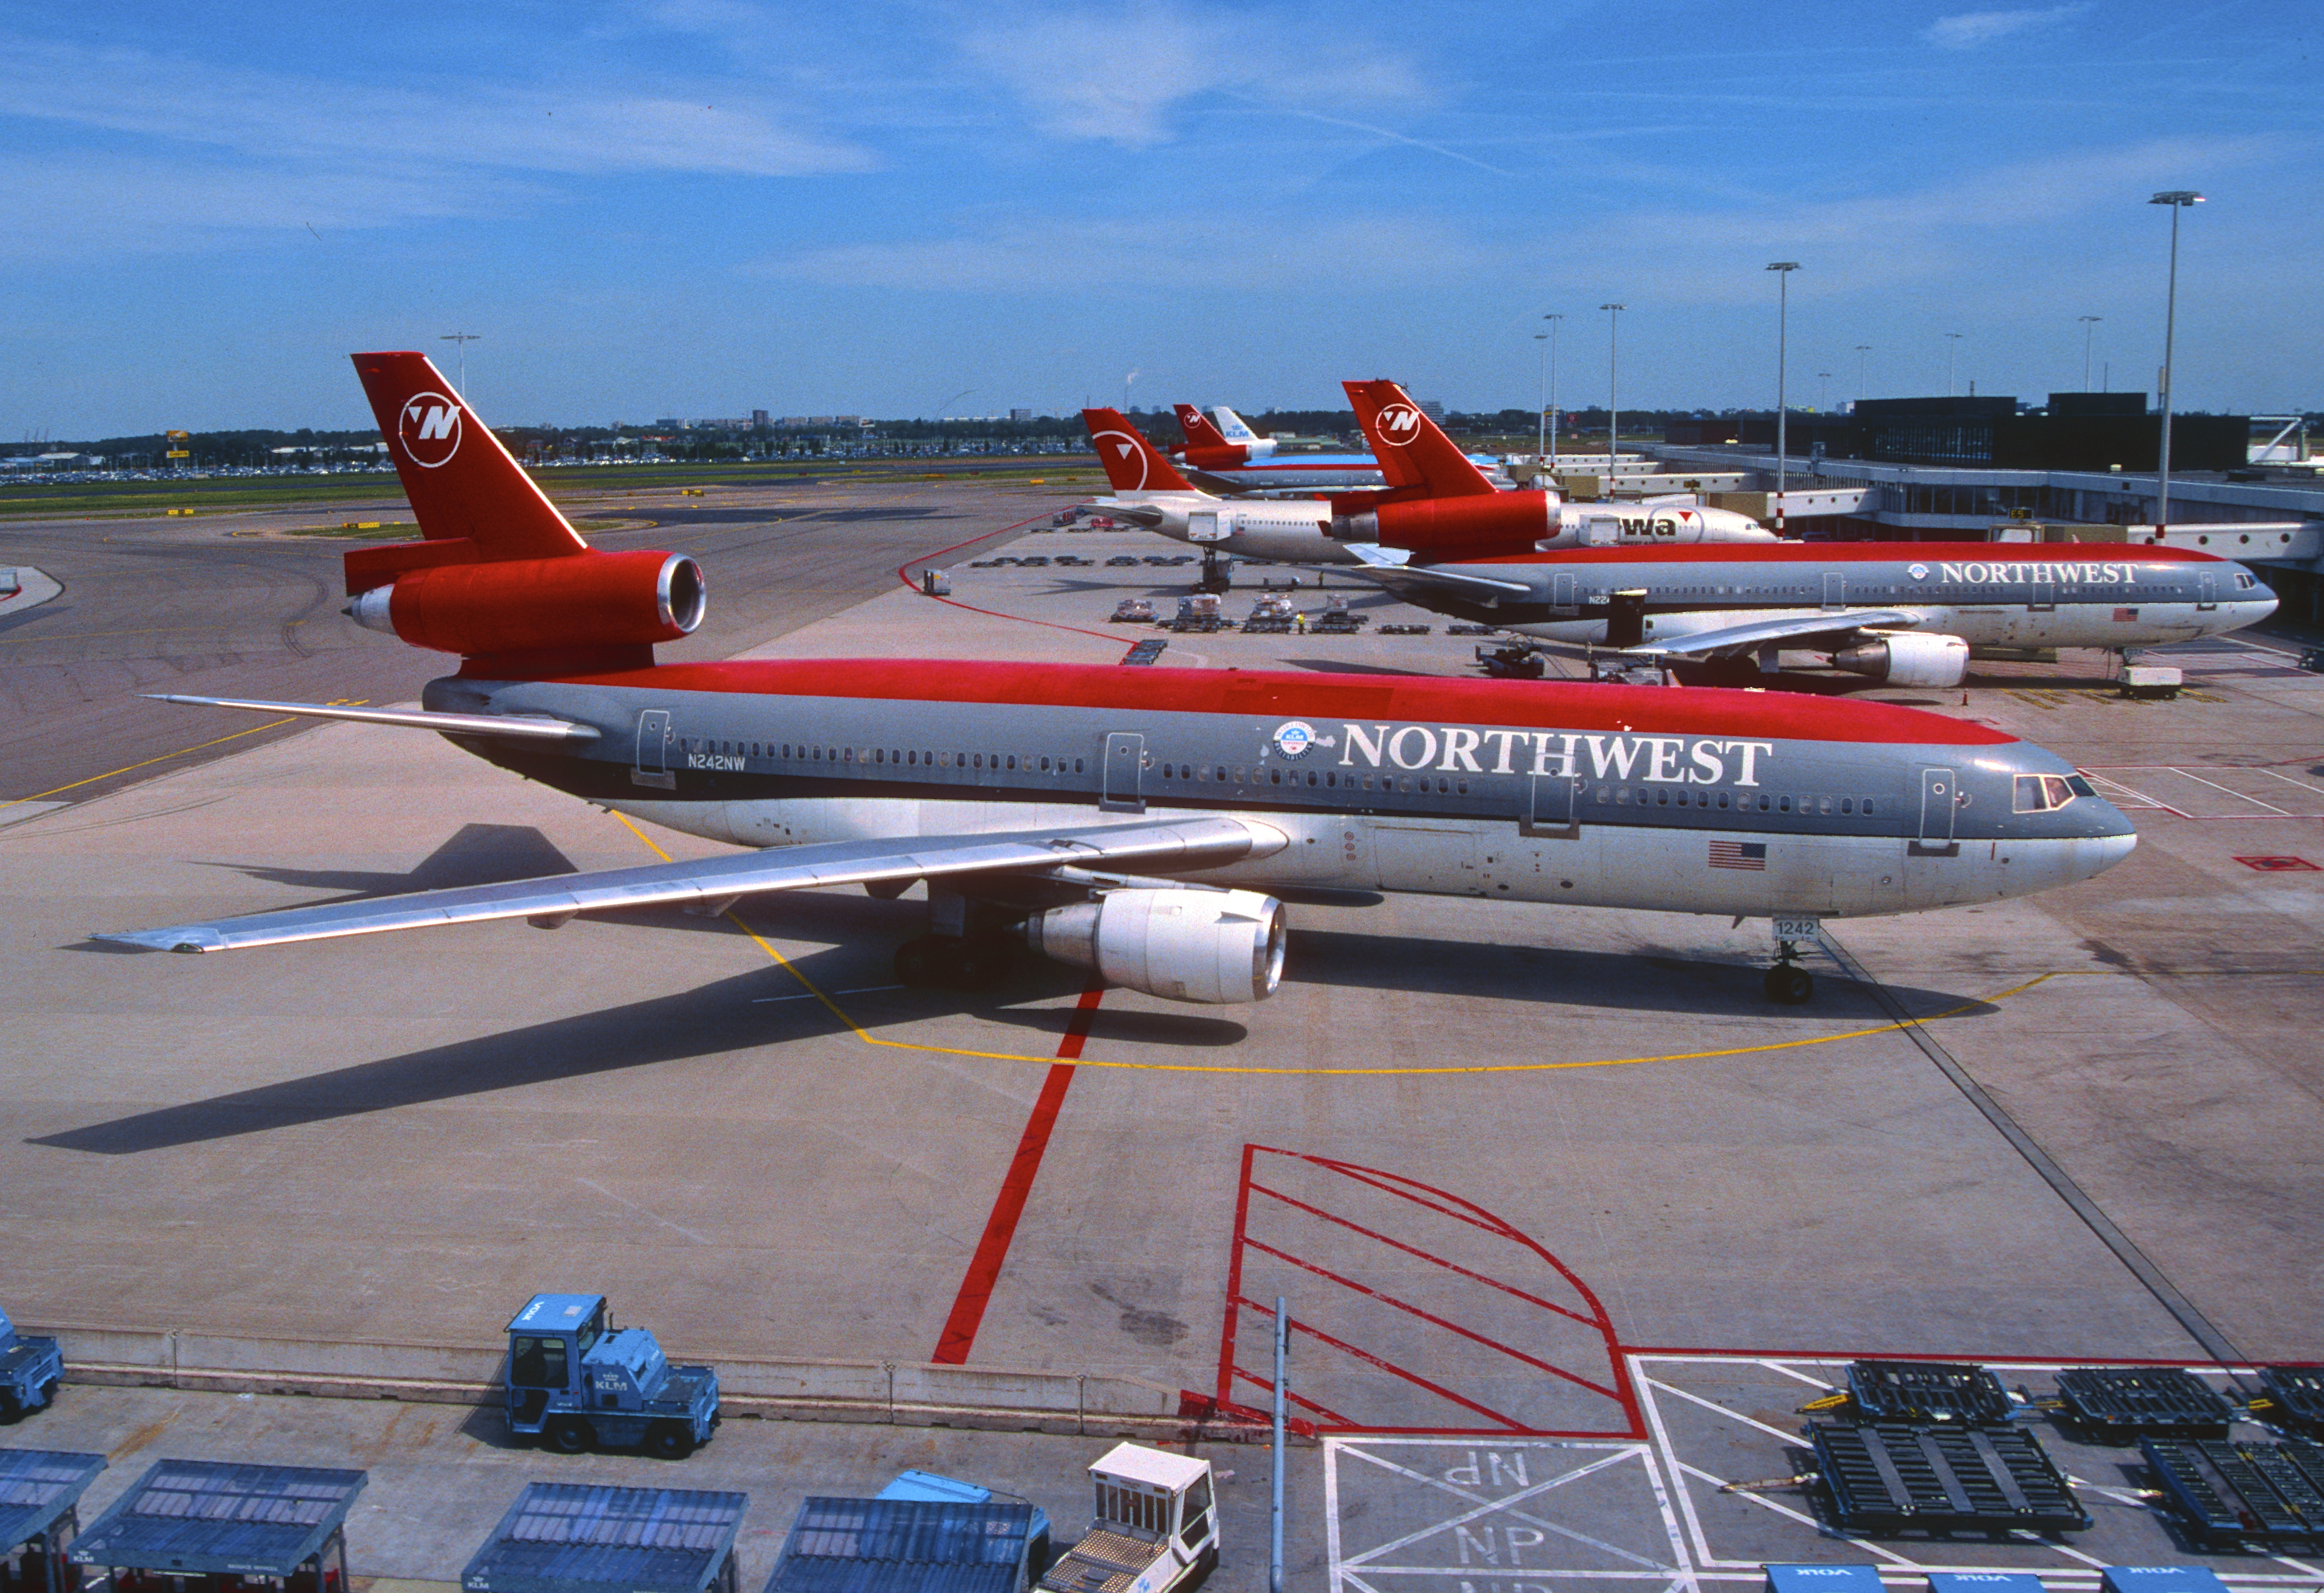 357cw - Northwest Airlines DC-10-30; N242NW@AMS;29.05.2005 (8102680417)